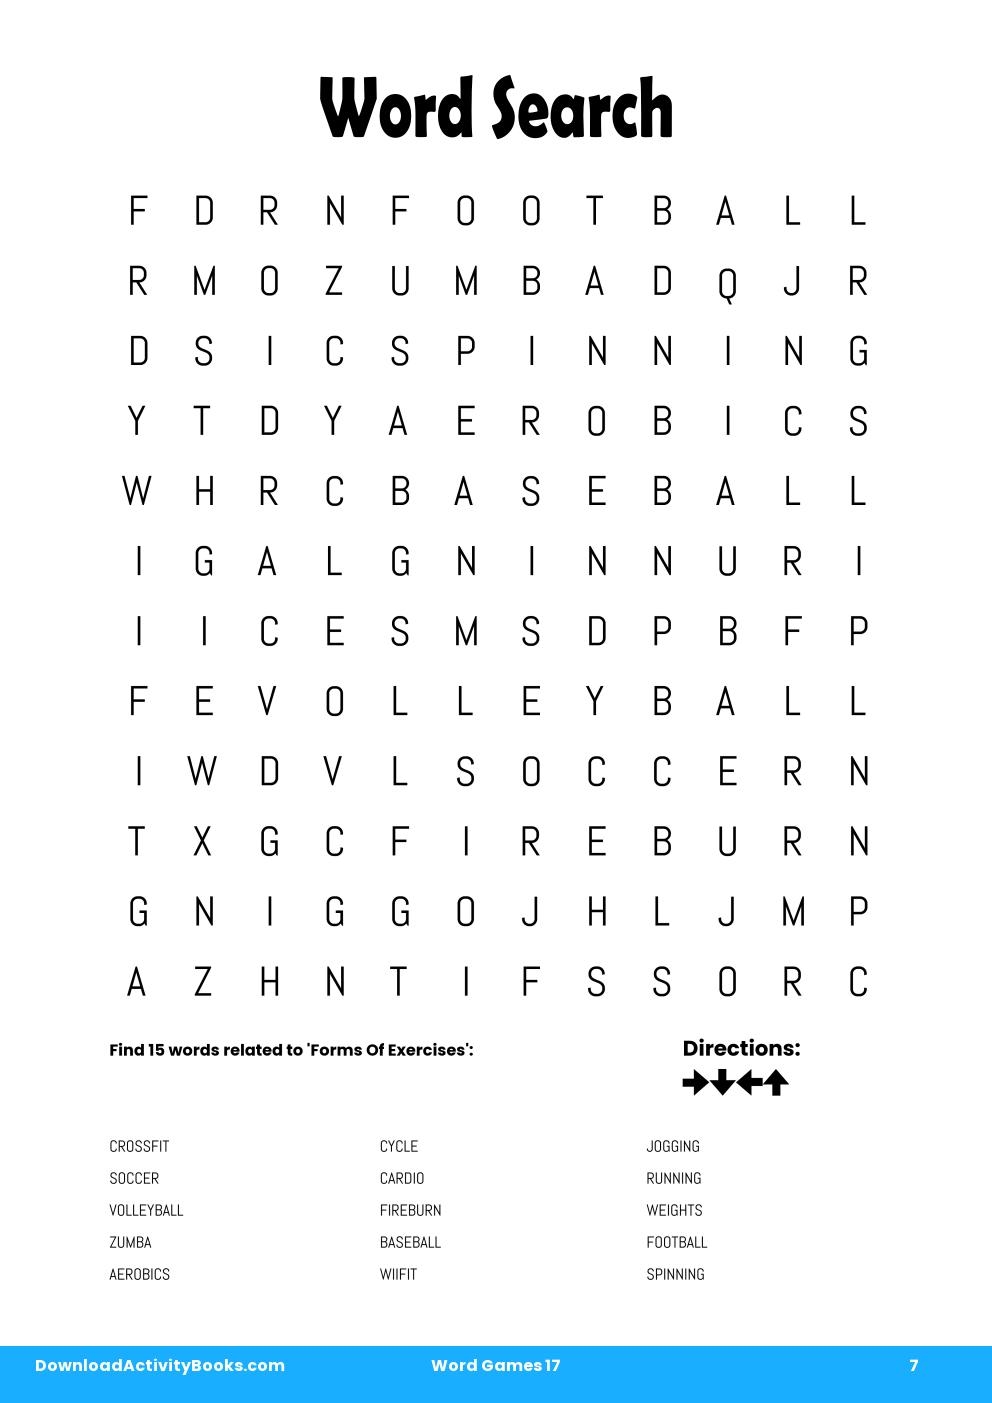 Word Search in Word Games 17